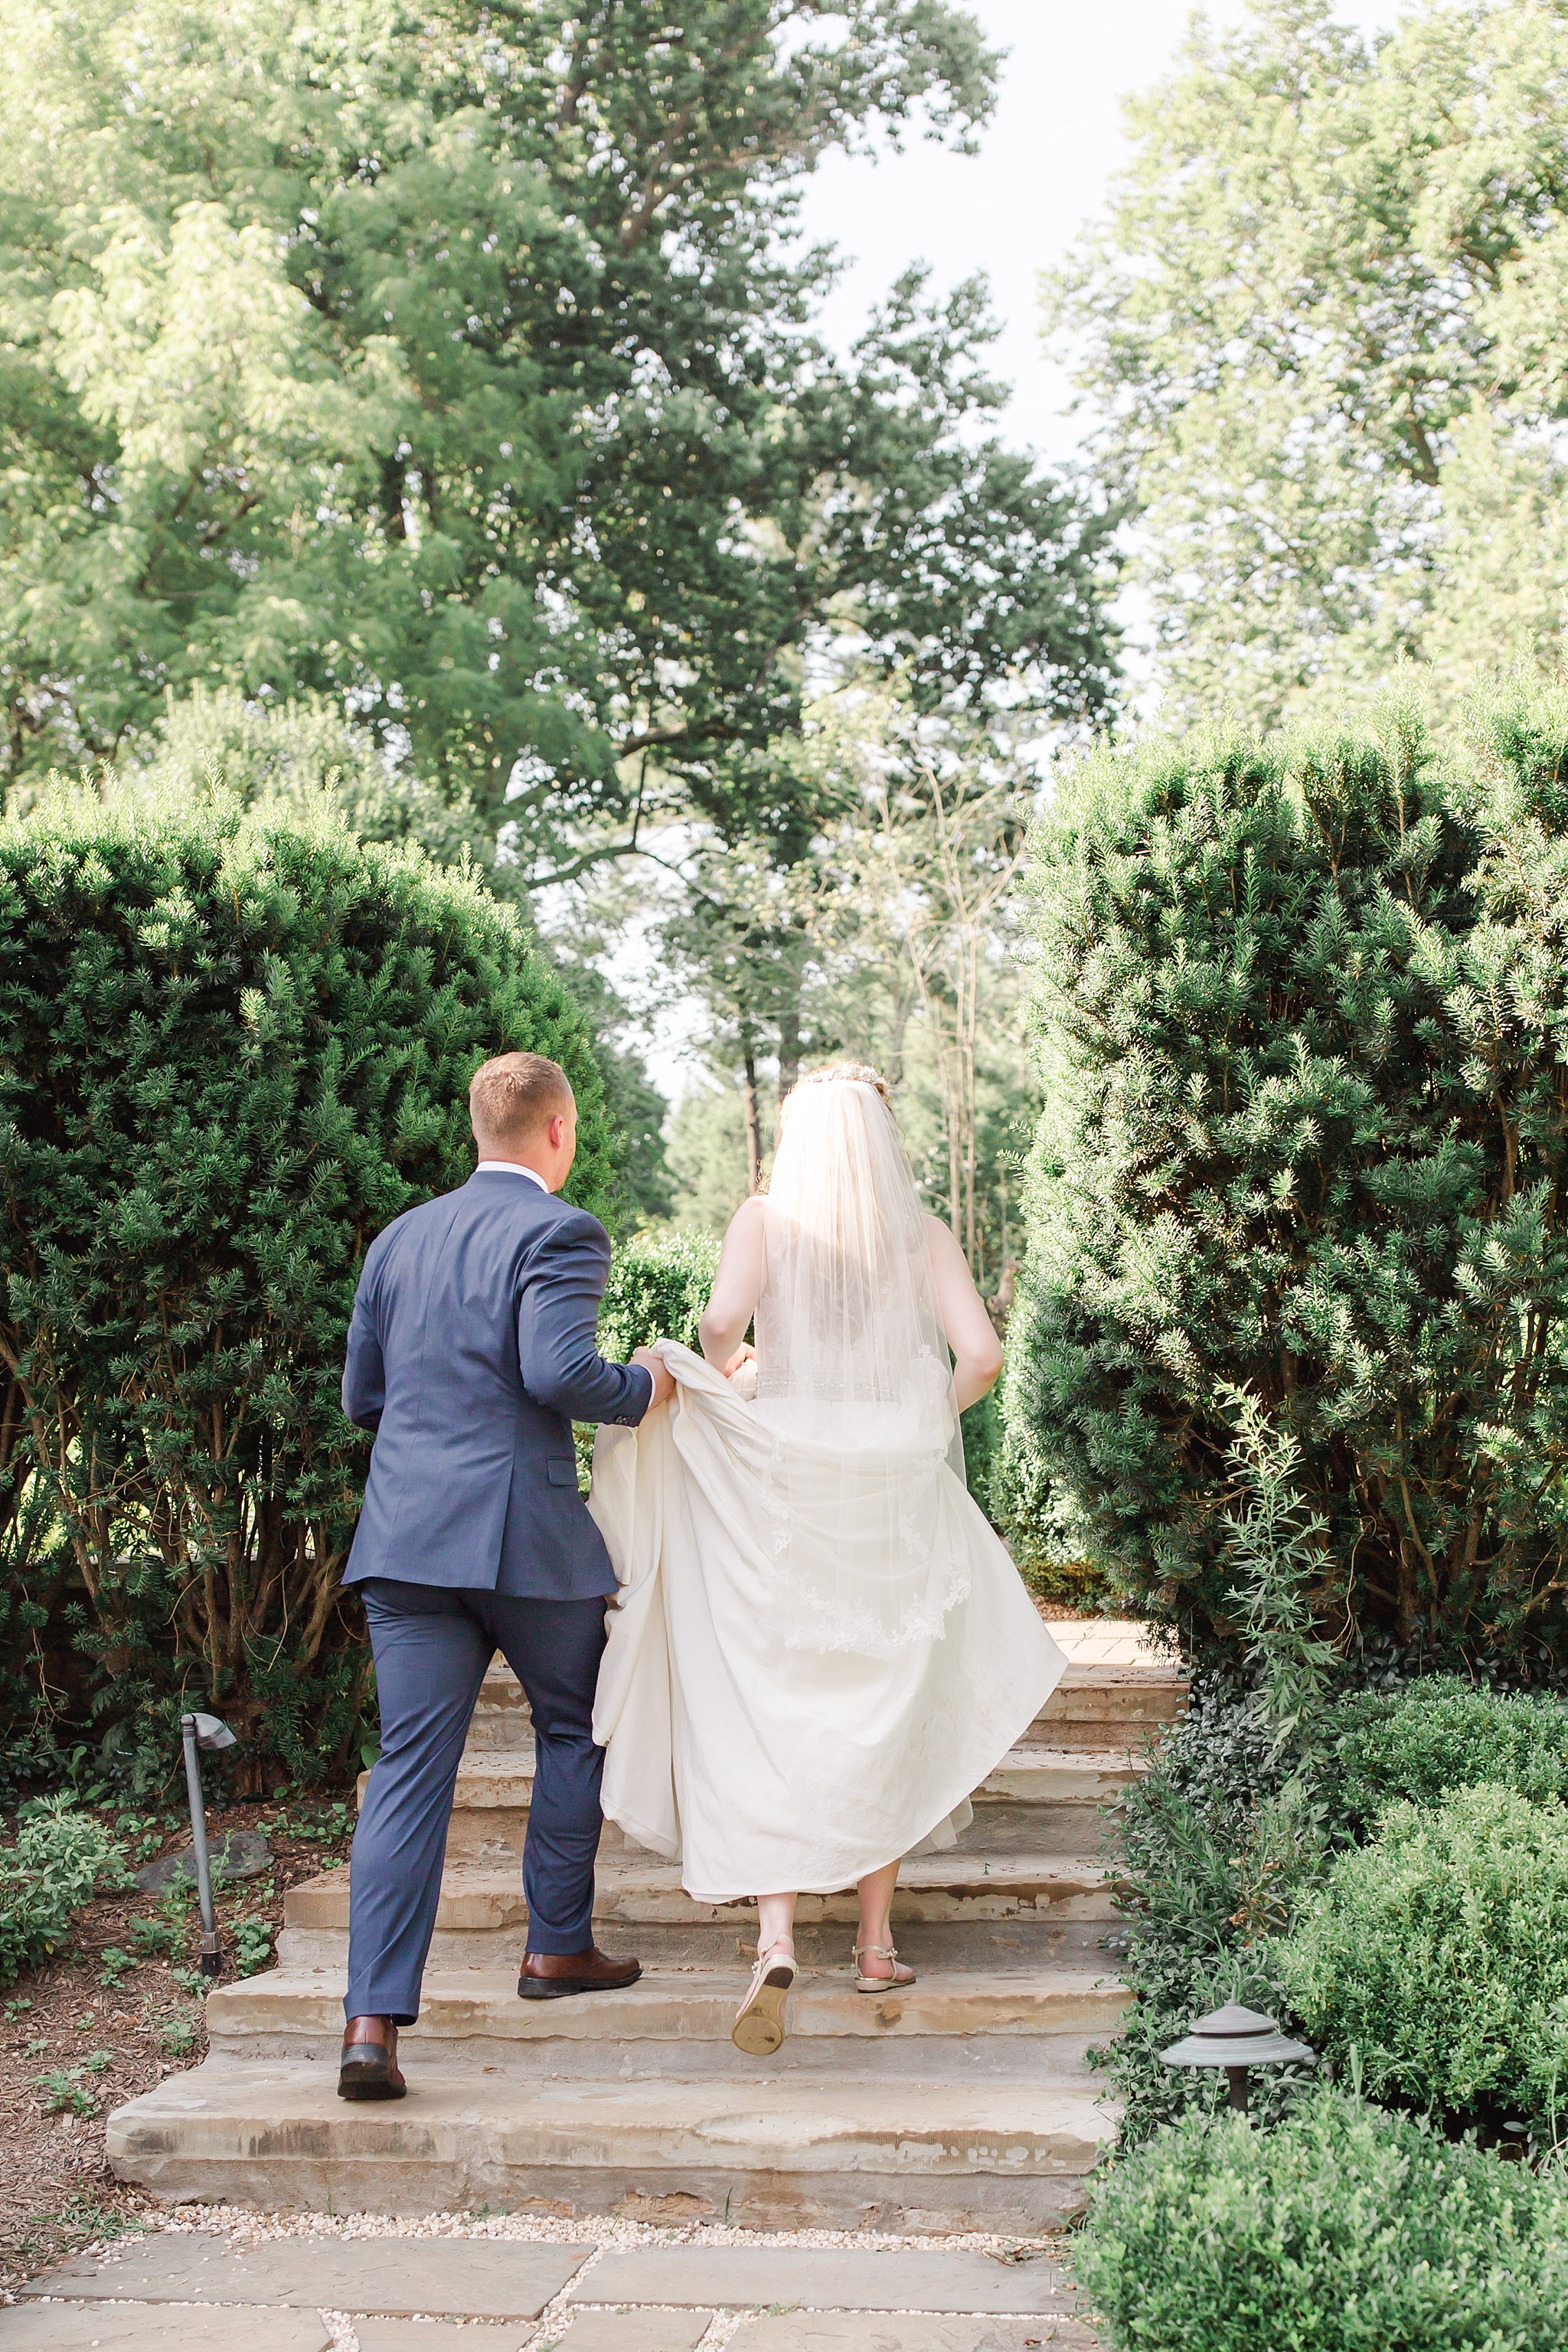 An elegant summer wedding at Airlie Center in Warrenton, VA as photographed by DC photographer, Alicia Lacey.